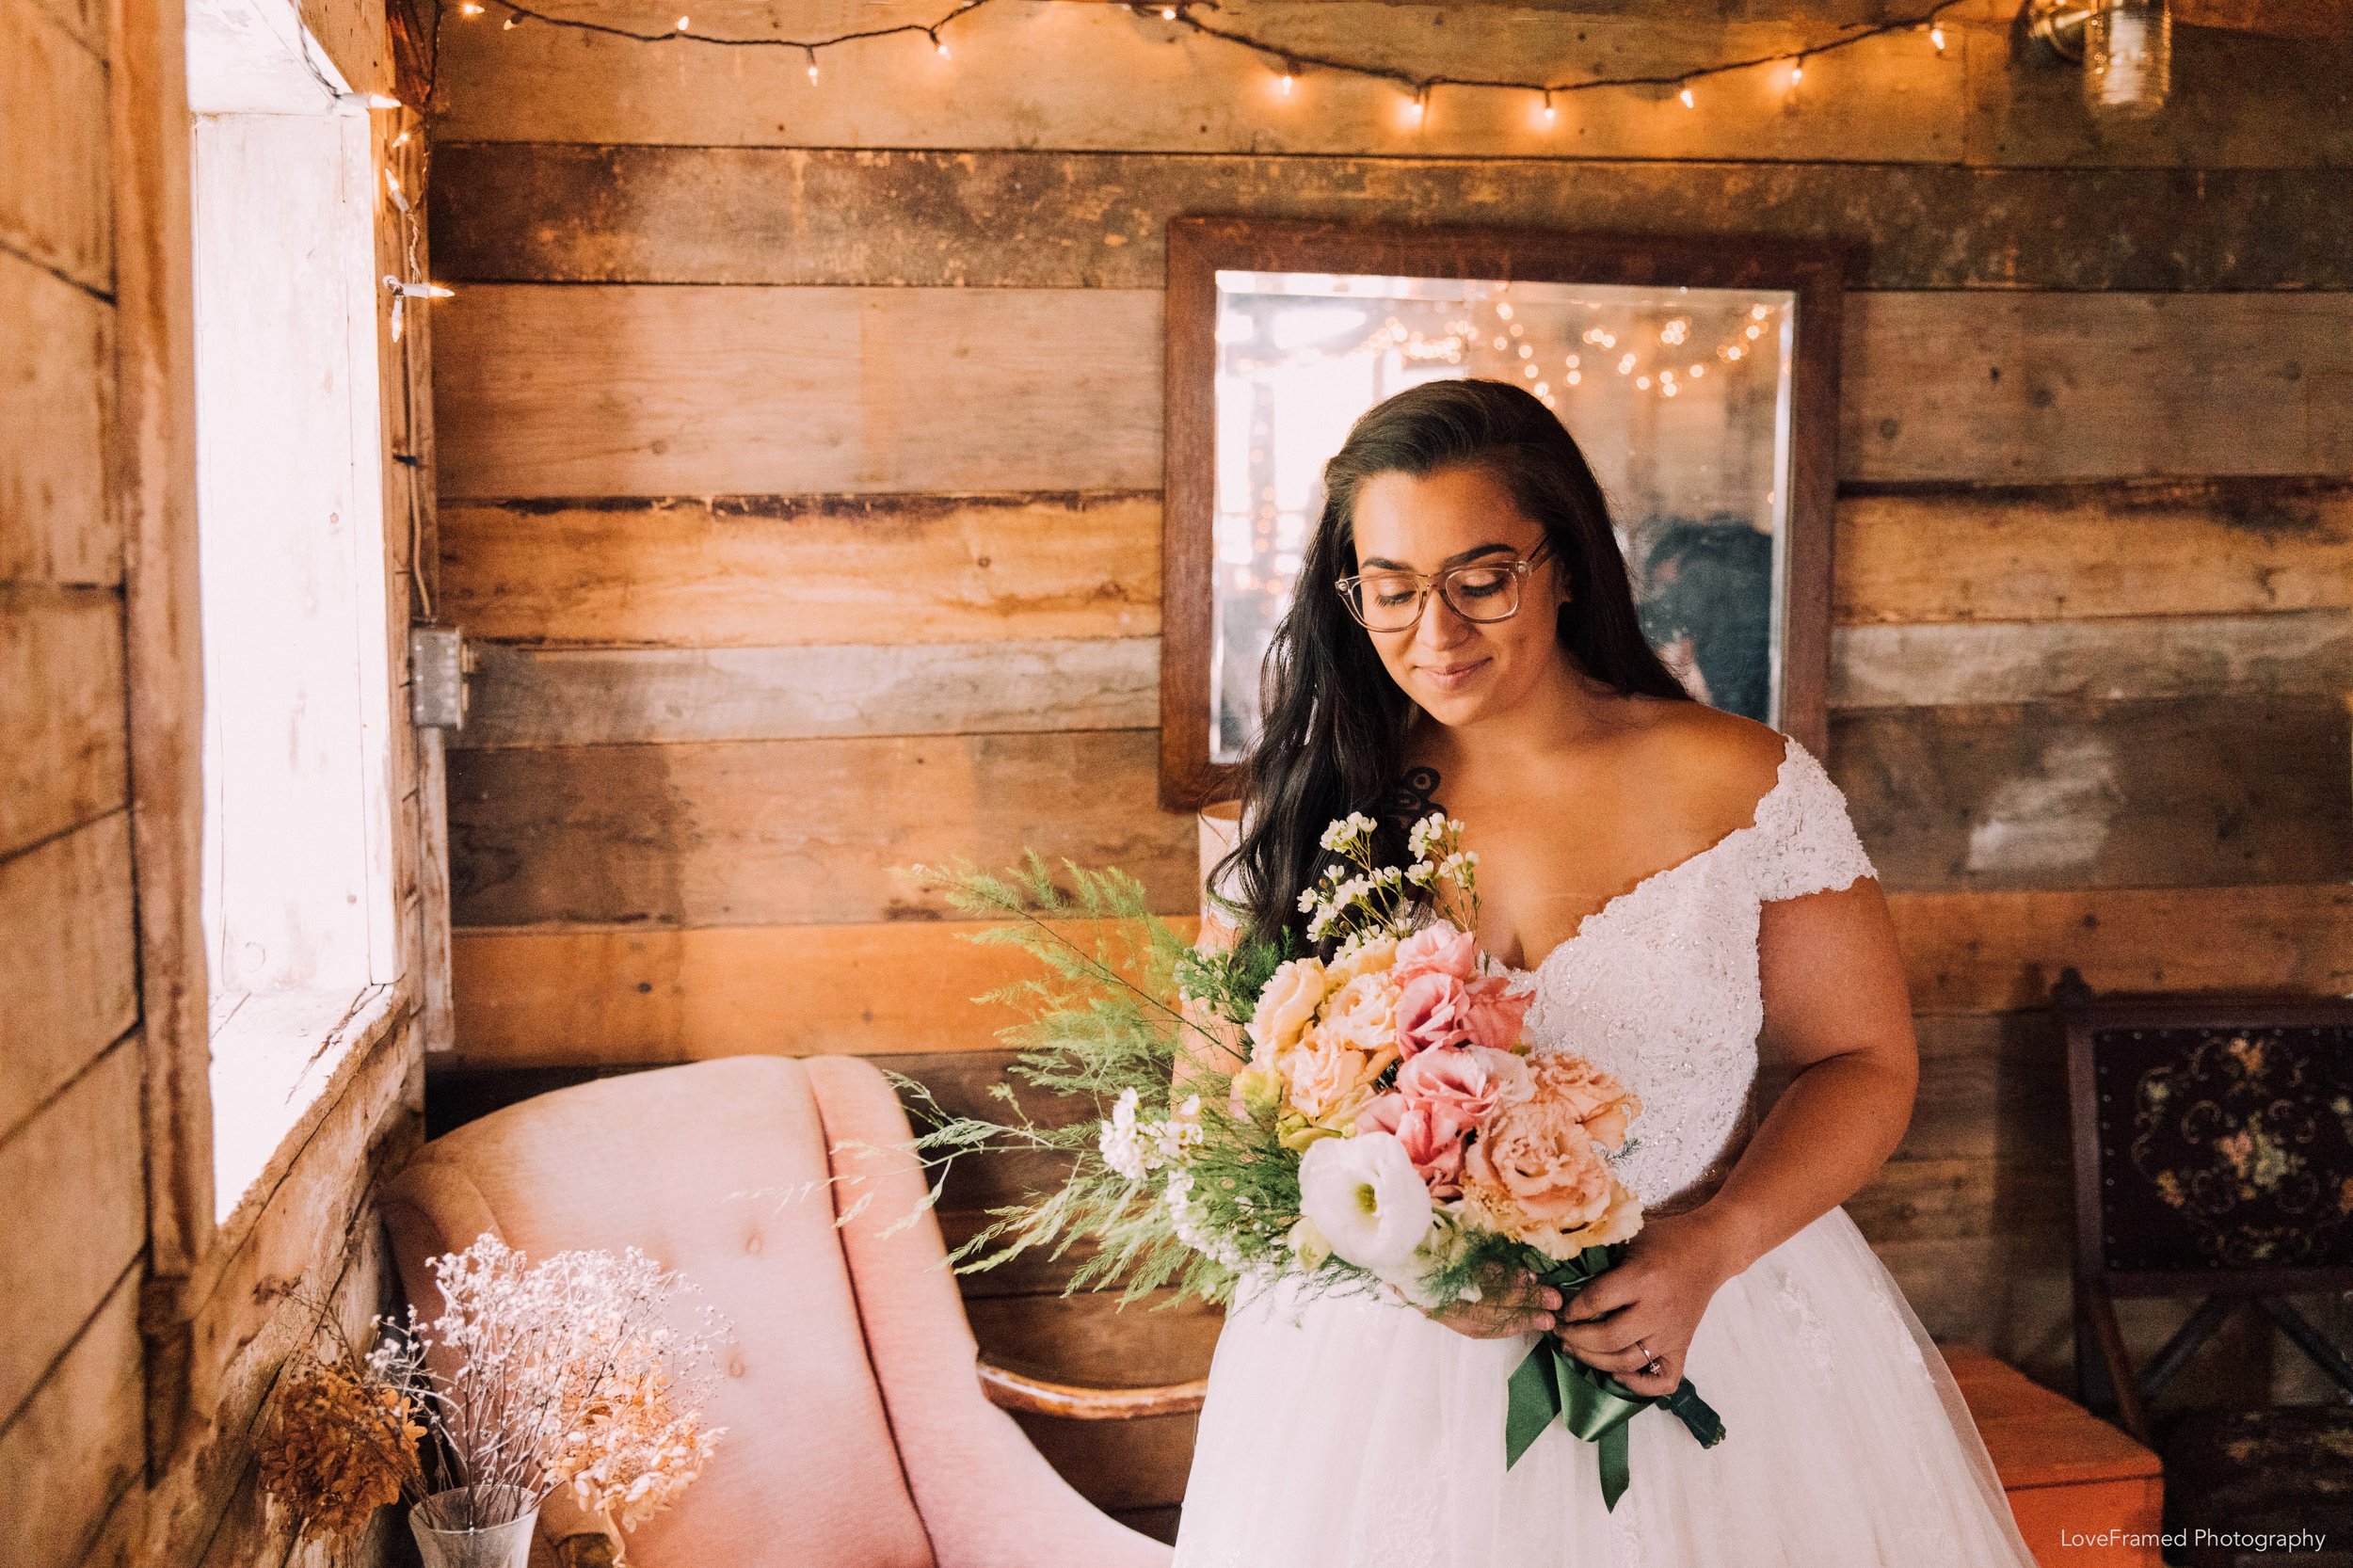 A bride and her bouquet in the corner of the barn